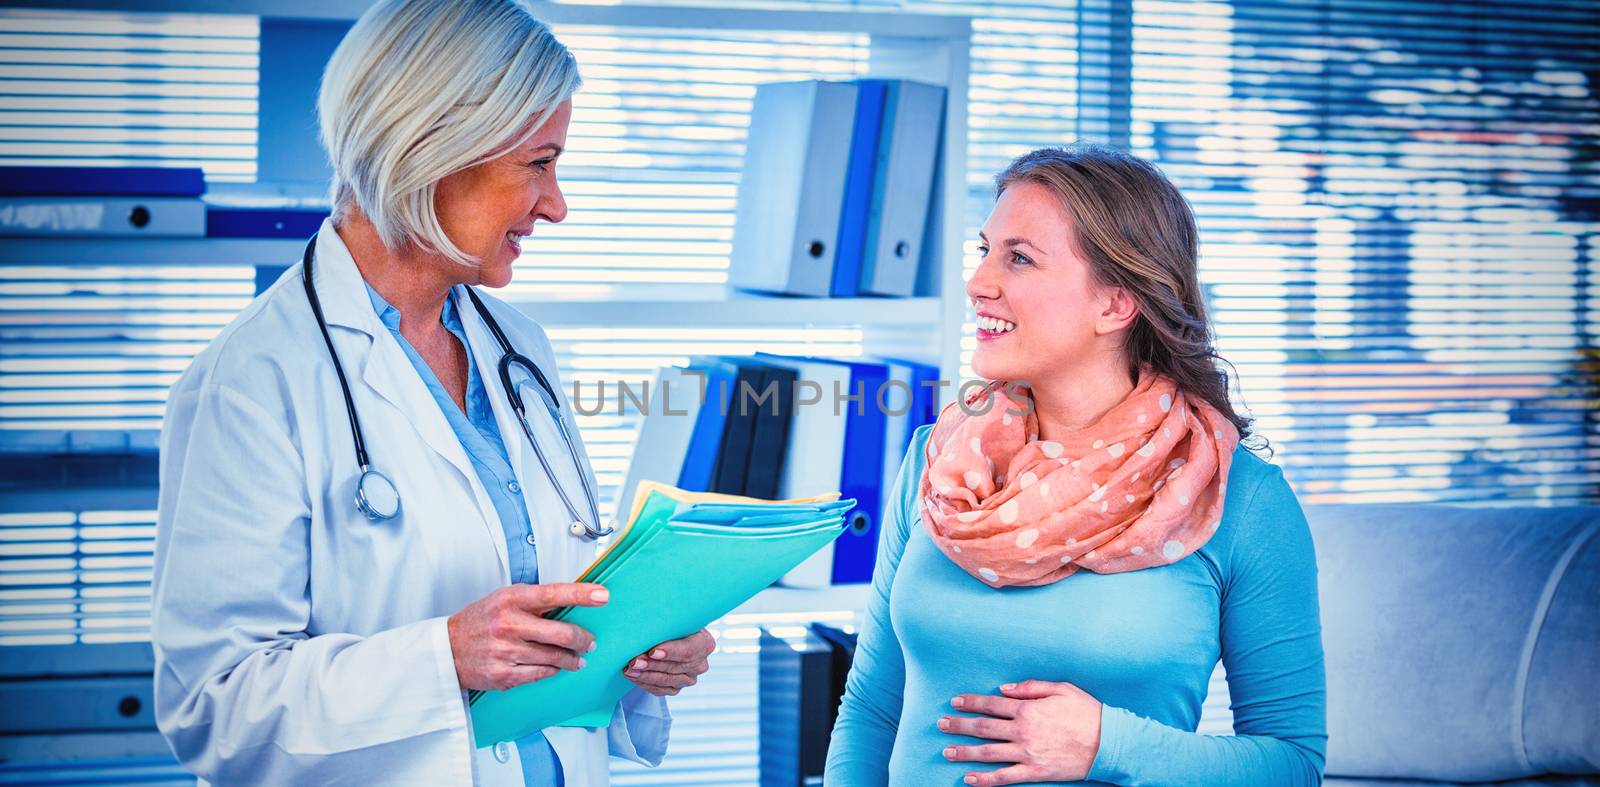 Pregnant patient consulting a doctor in hospital